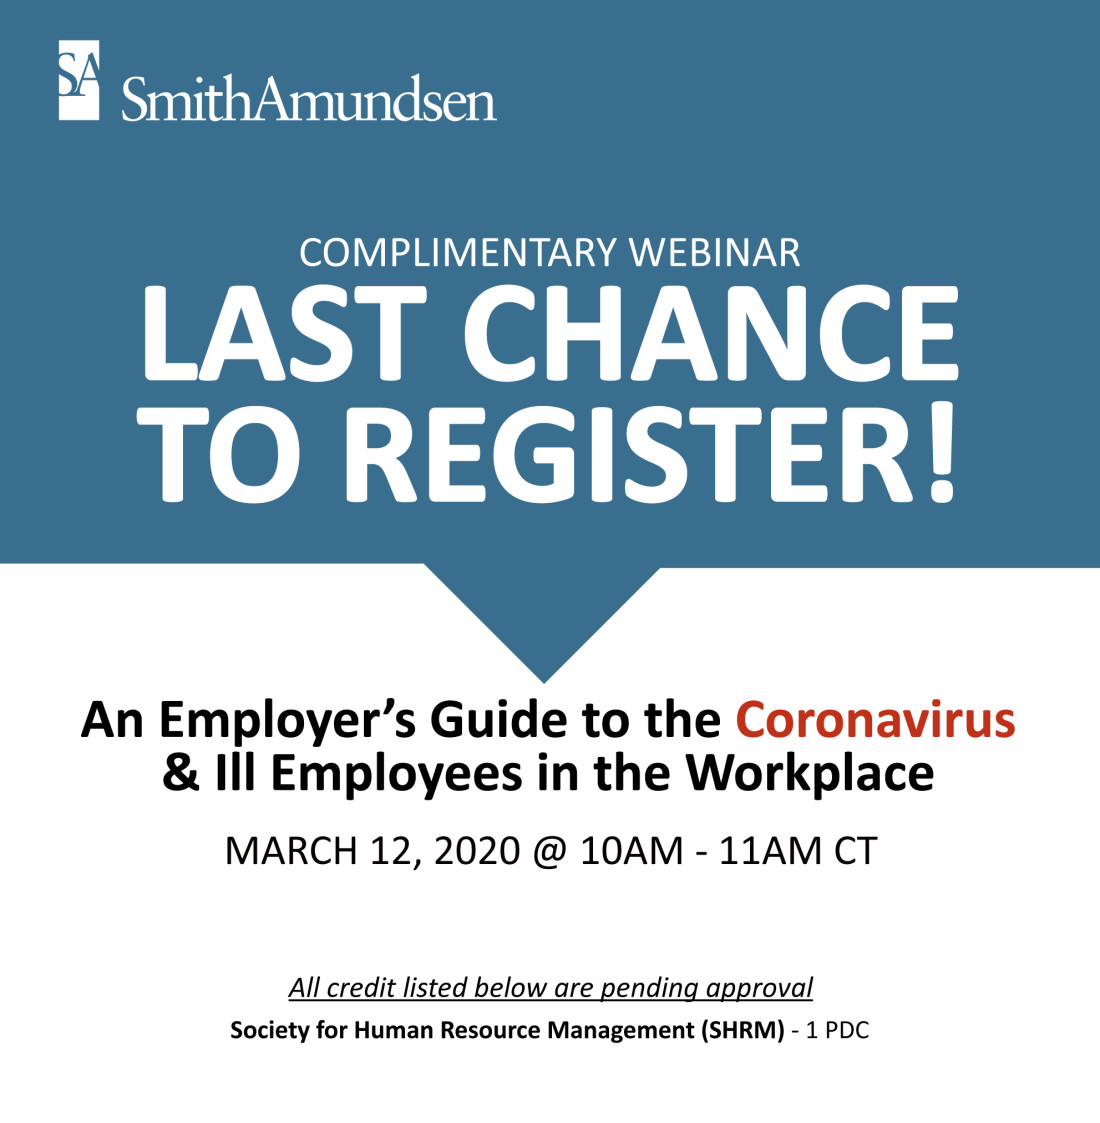 Last Chance to Register! An Employer's Guide to the Coronavirus & Ill Employees in the Workplace